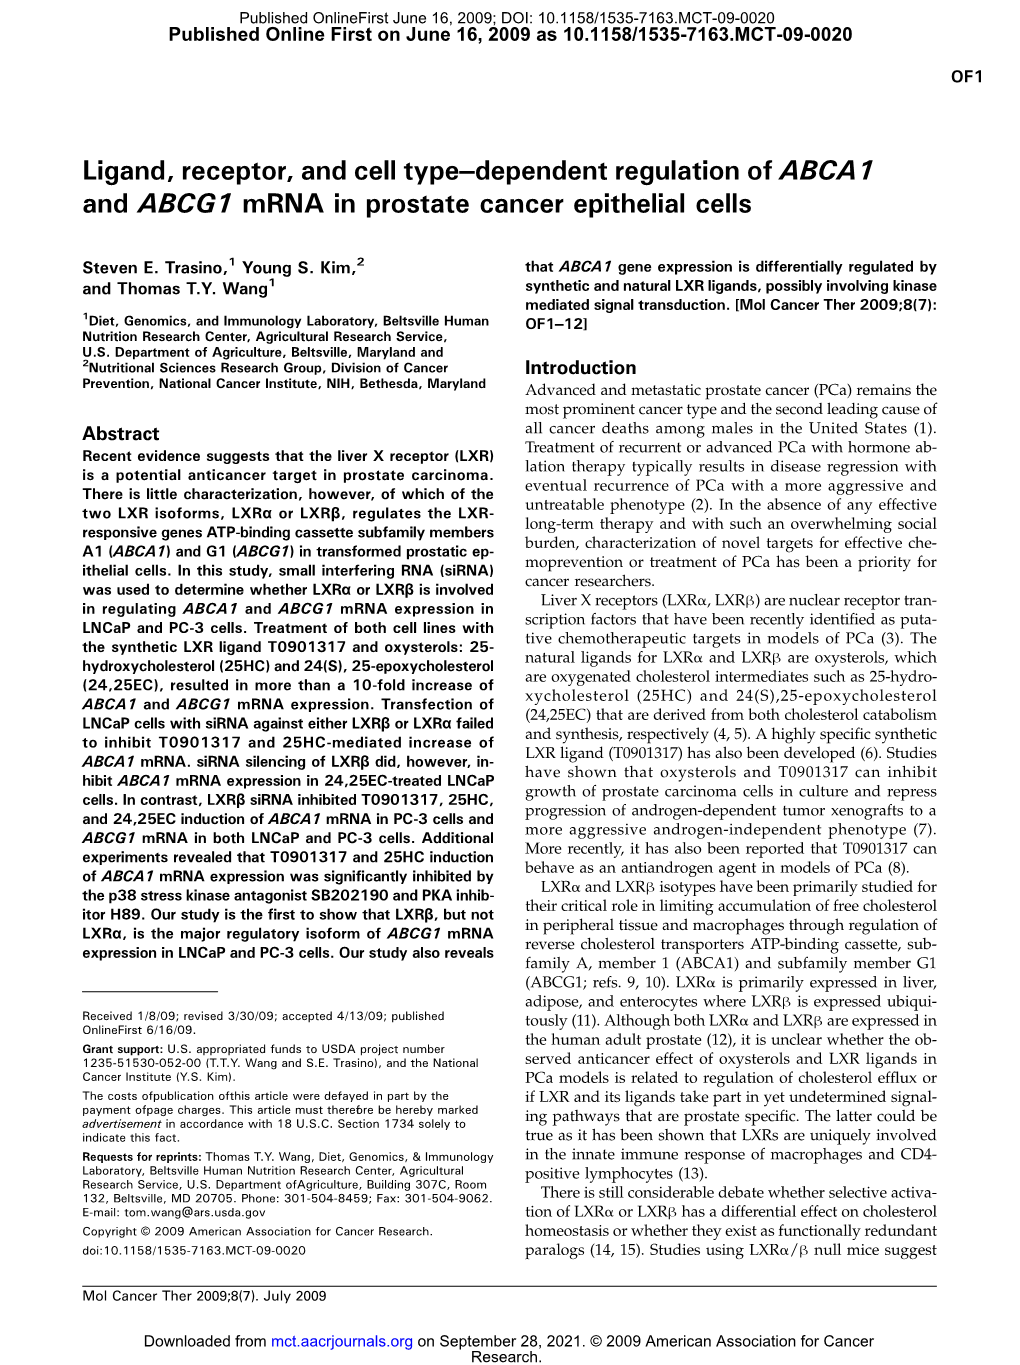 Ligand, Receptor, and Cell Type–Dependent Regulation of ABCA1 and ABCG1 Mrna in Prostate Cancer Epithelial Cells